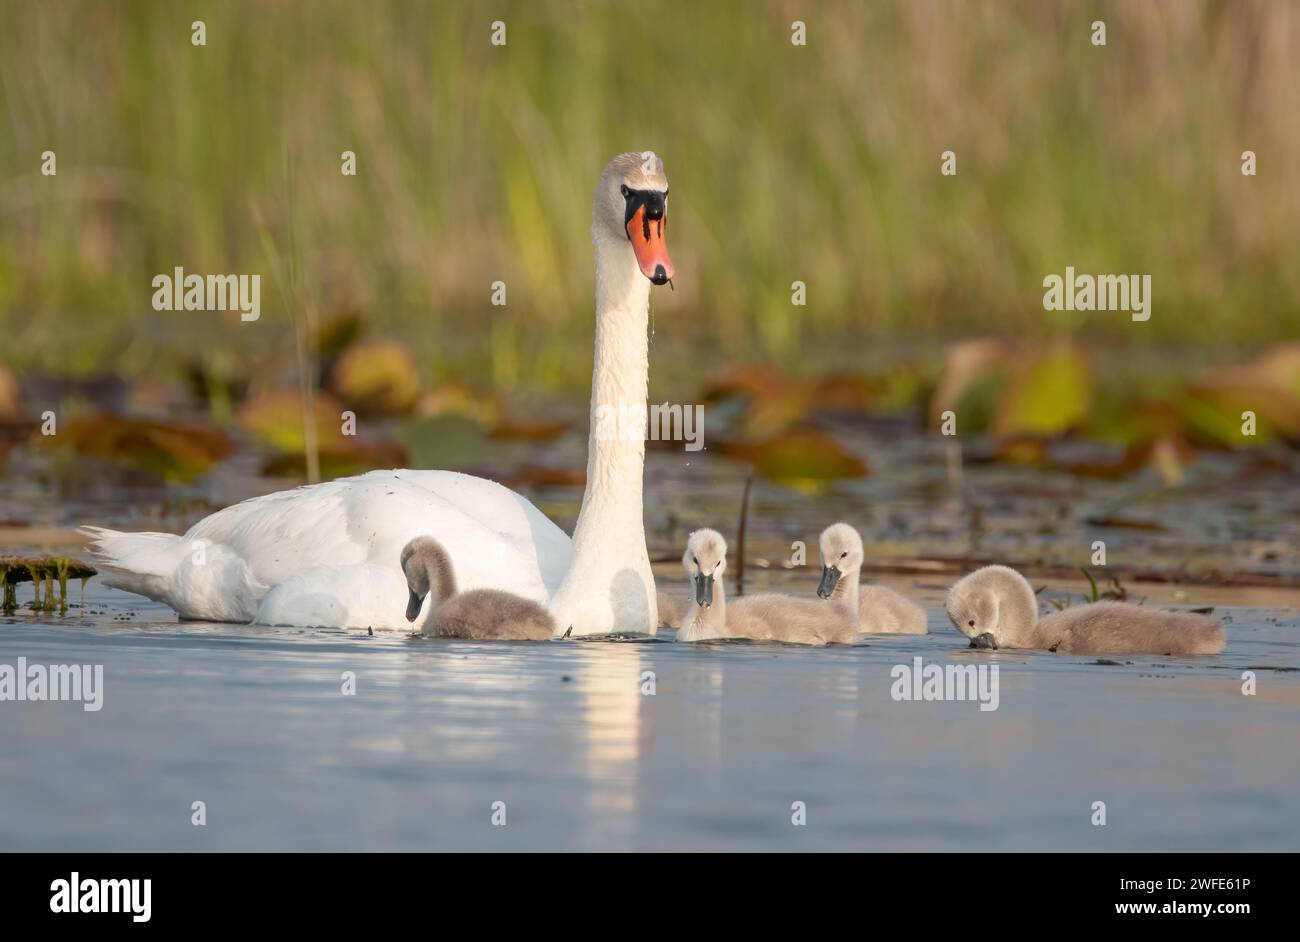 A mother swan with chicks. Danube Delta ornithology destination. Tourism destination of Romania.  Baby swan. Mute swans (Cygnus olor) Stock Photo